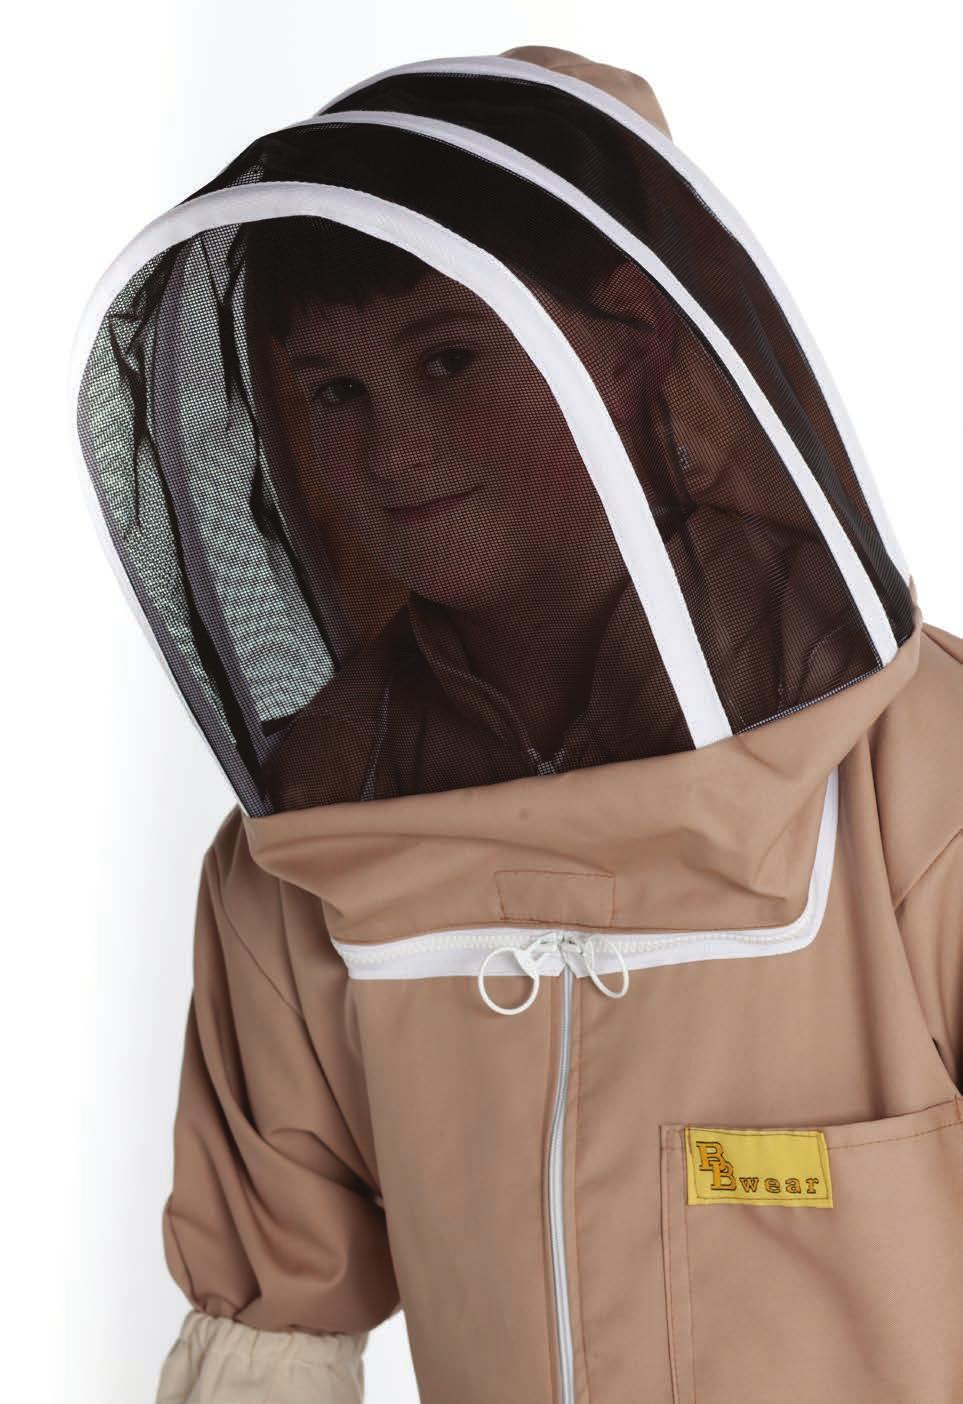 Sizes available: Up to Age 12 Chest 30-32 Height: 5 1 67% Polyester / 33% Cotton Detachable hood Velcro tabs where neck